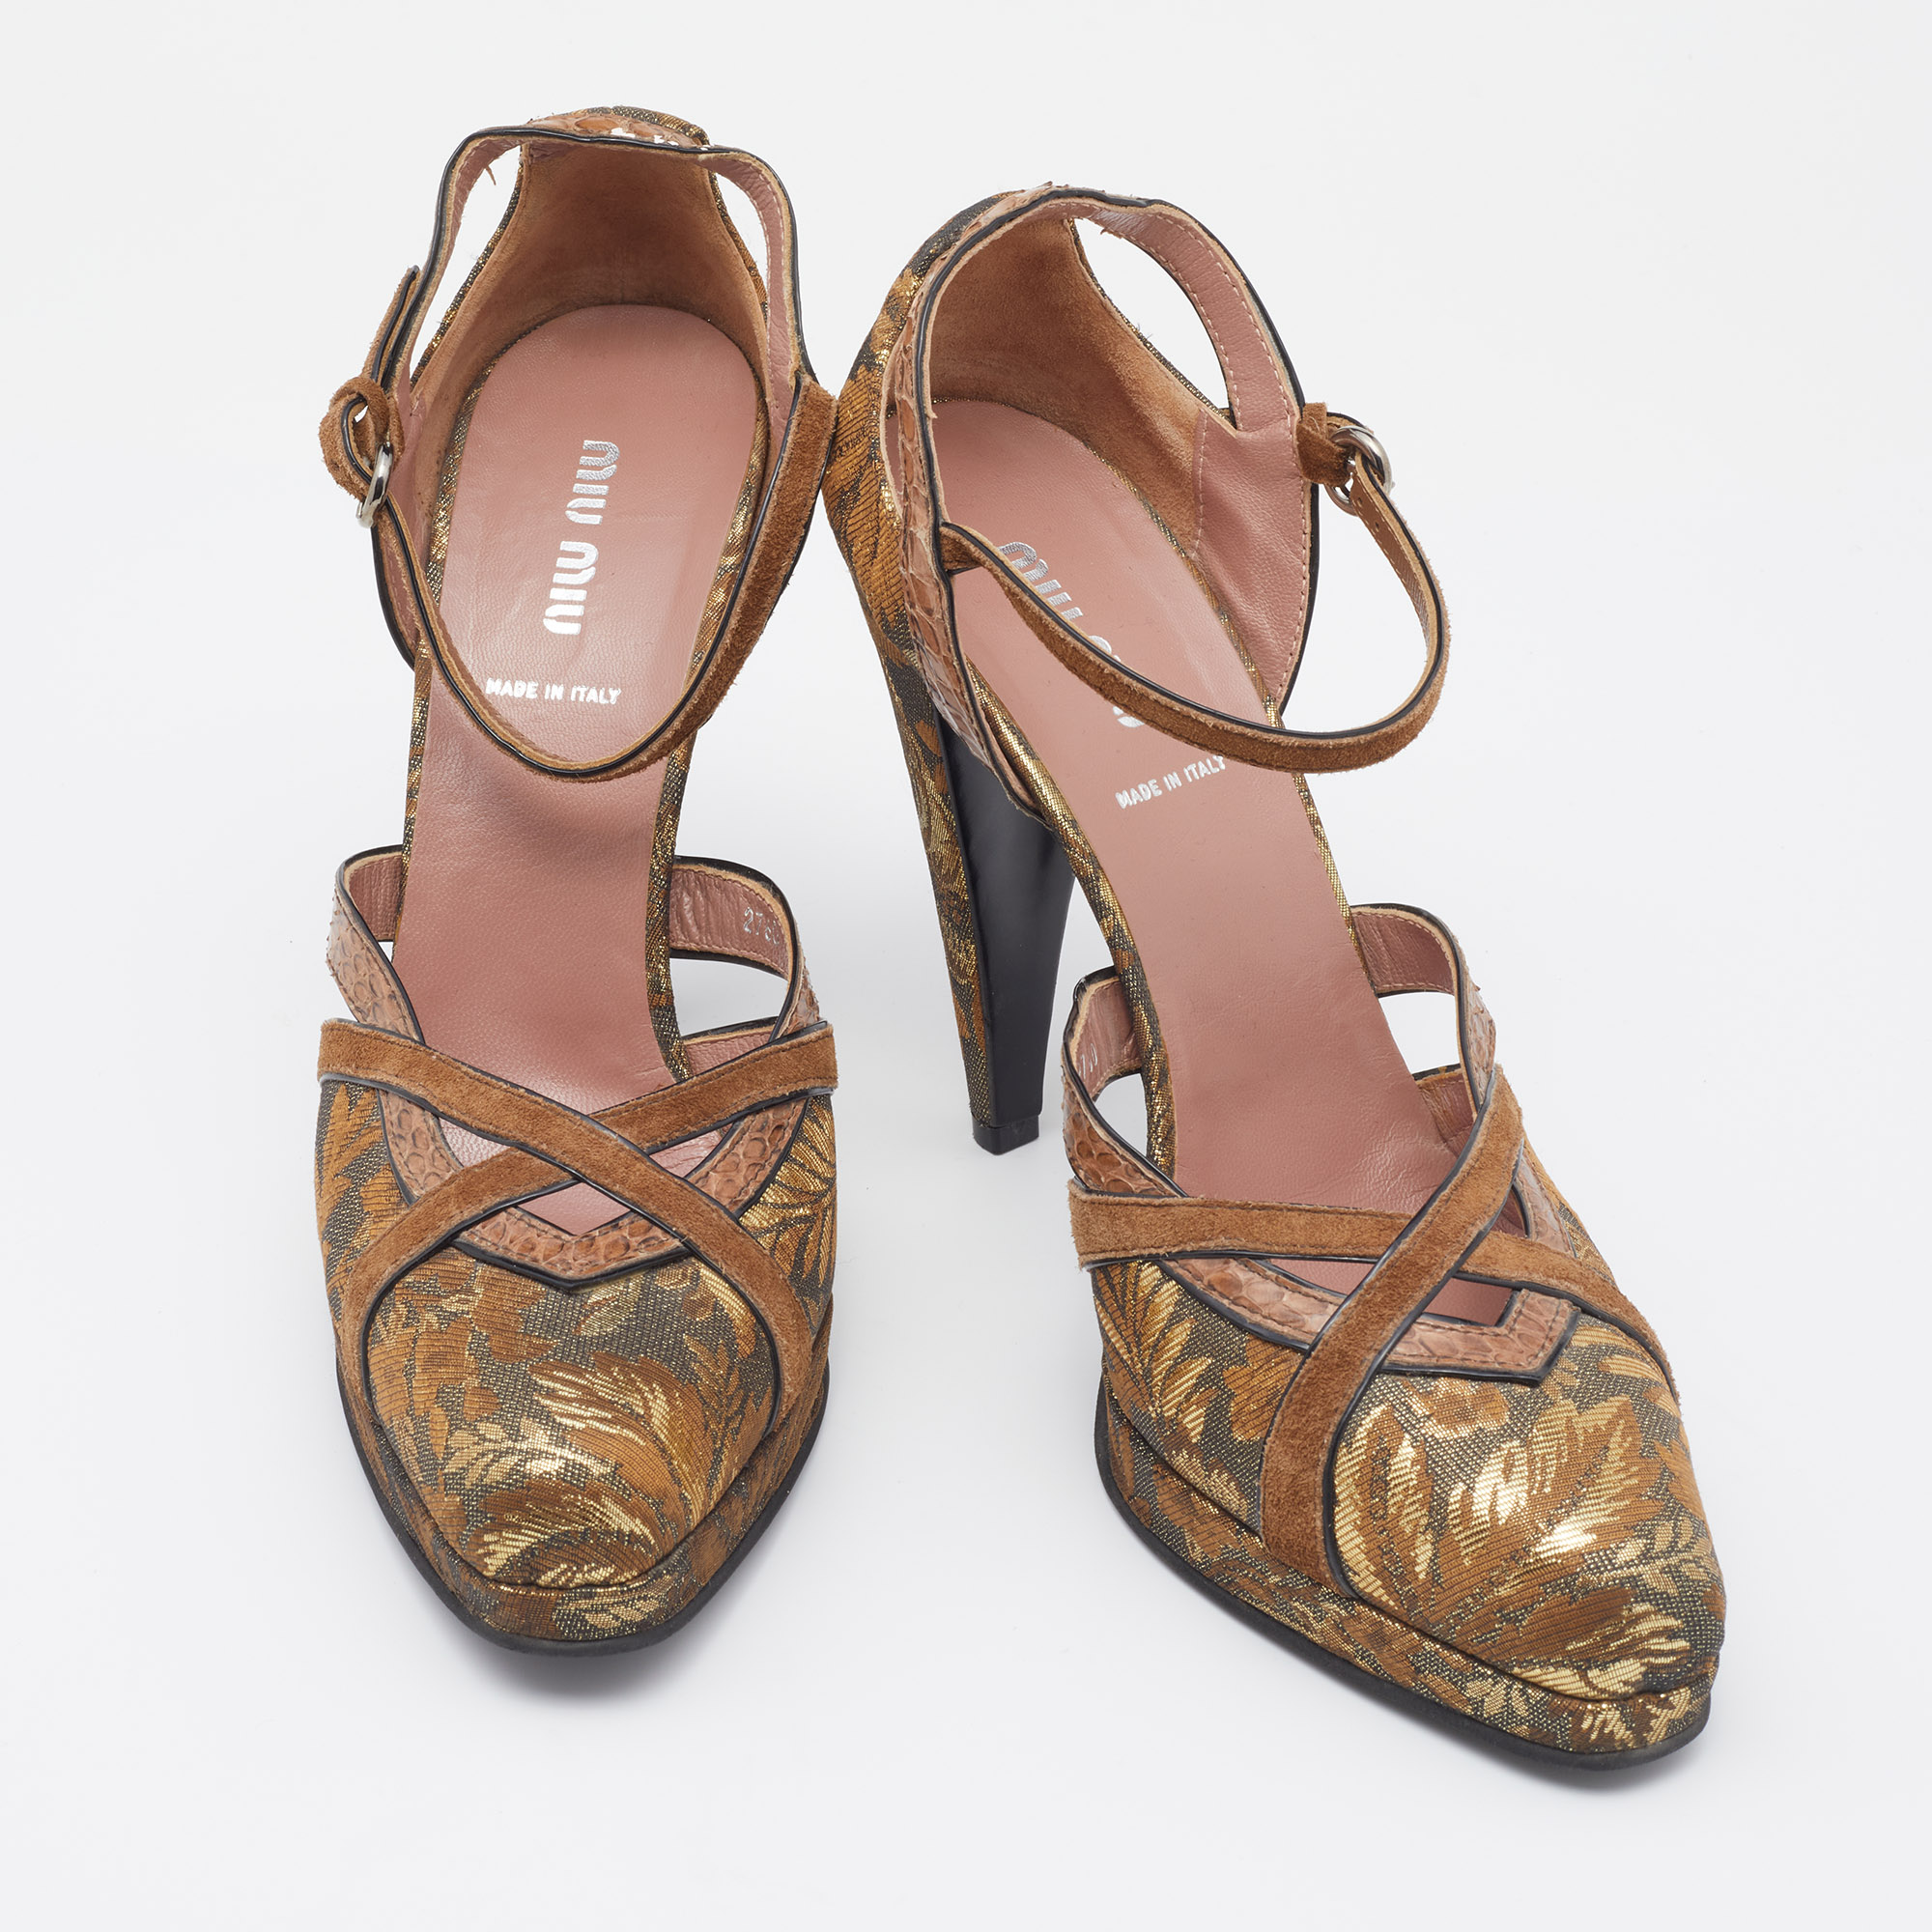 Miu Miu Brown/Gold Brocade Fabric And Python Trim D'orsay Ankle Strap Pumps Size 40